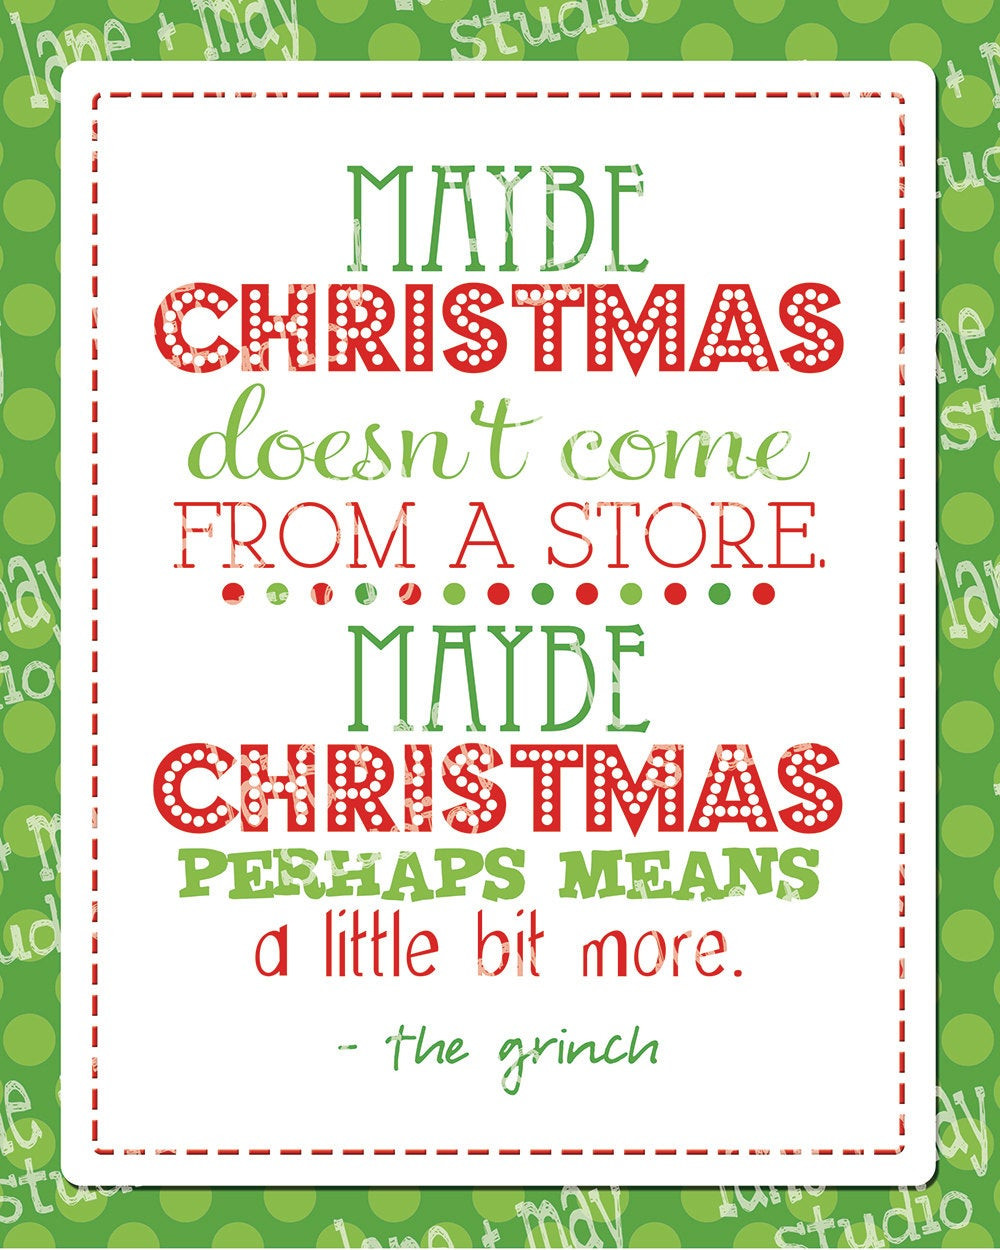 Grinch Quotes About Christmas
 christmas grinch quote 8 x 10 digital print INSTANT by